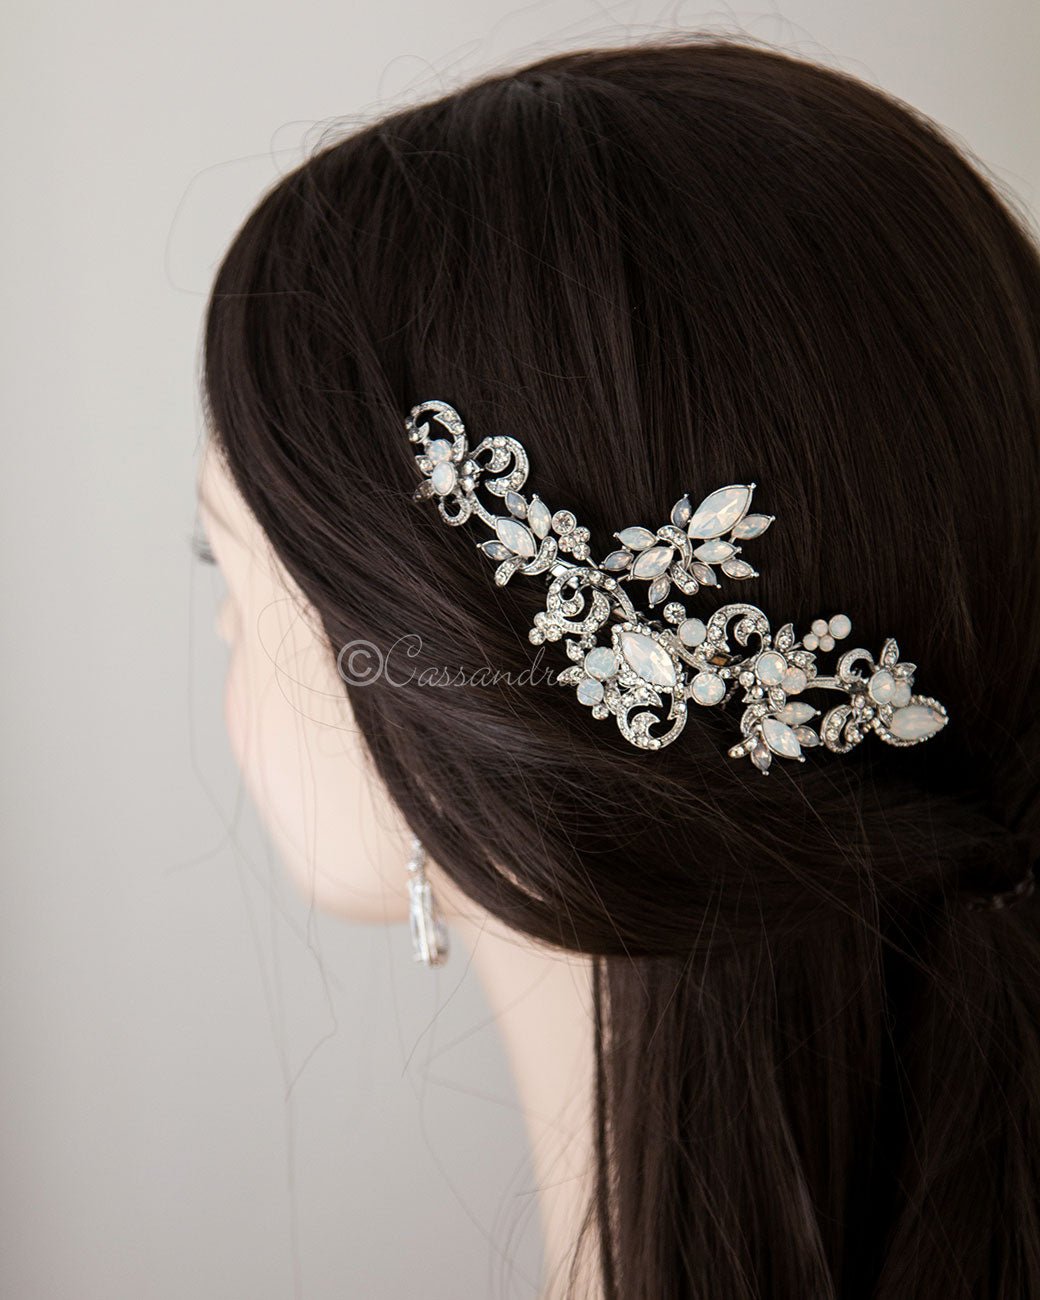 Vintage Wedding Comb with Opal Crystals - Cassandra Lynne